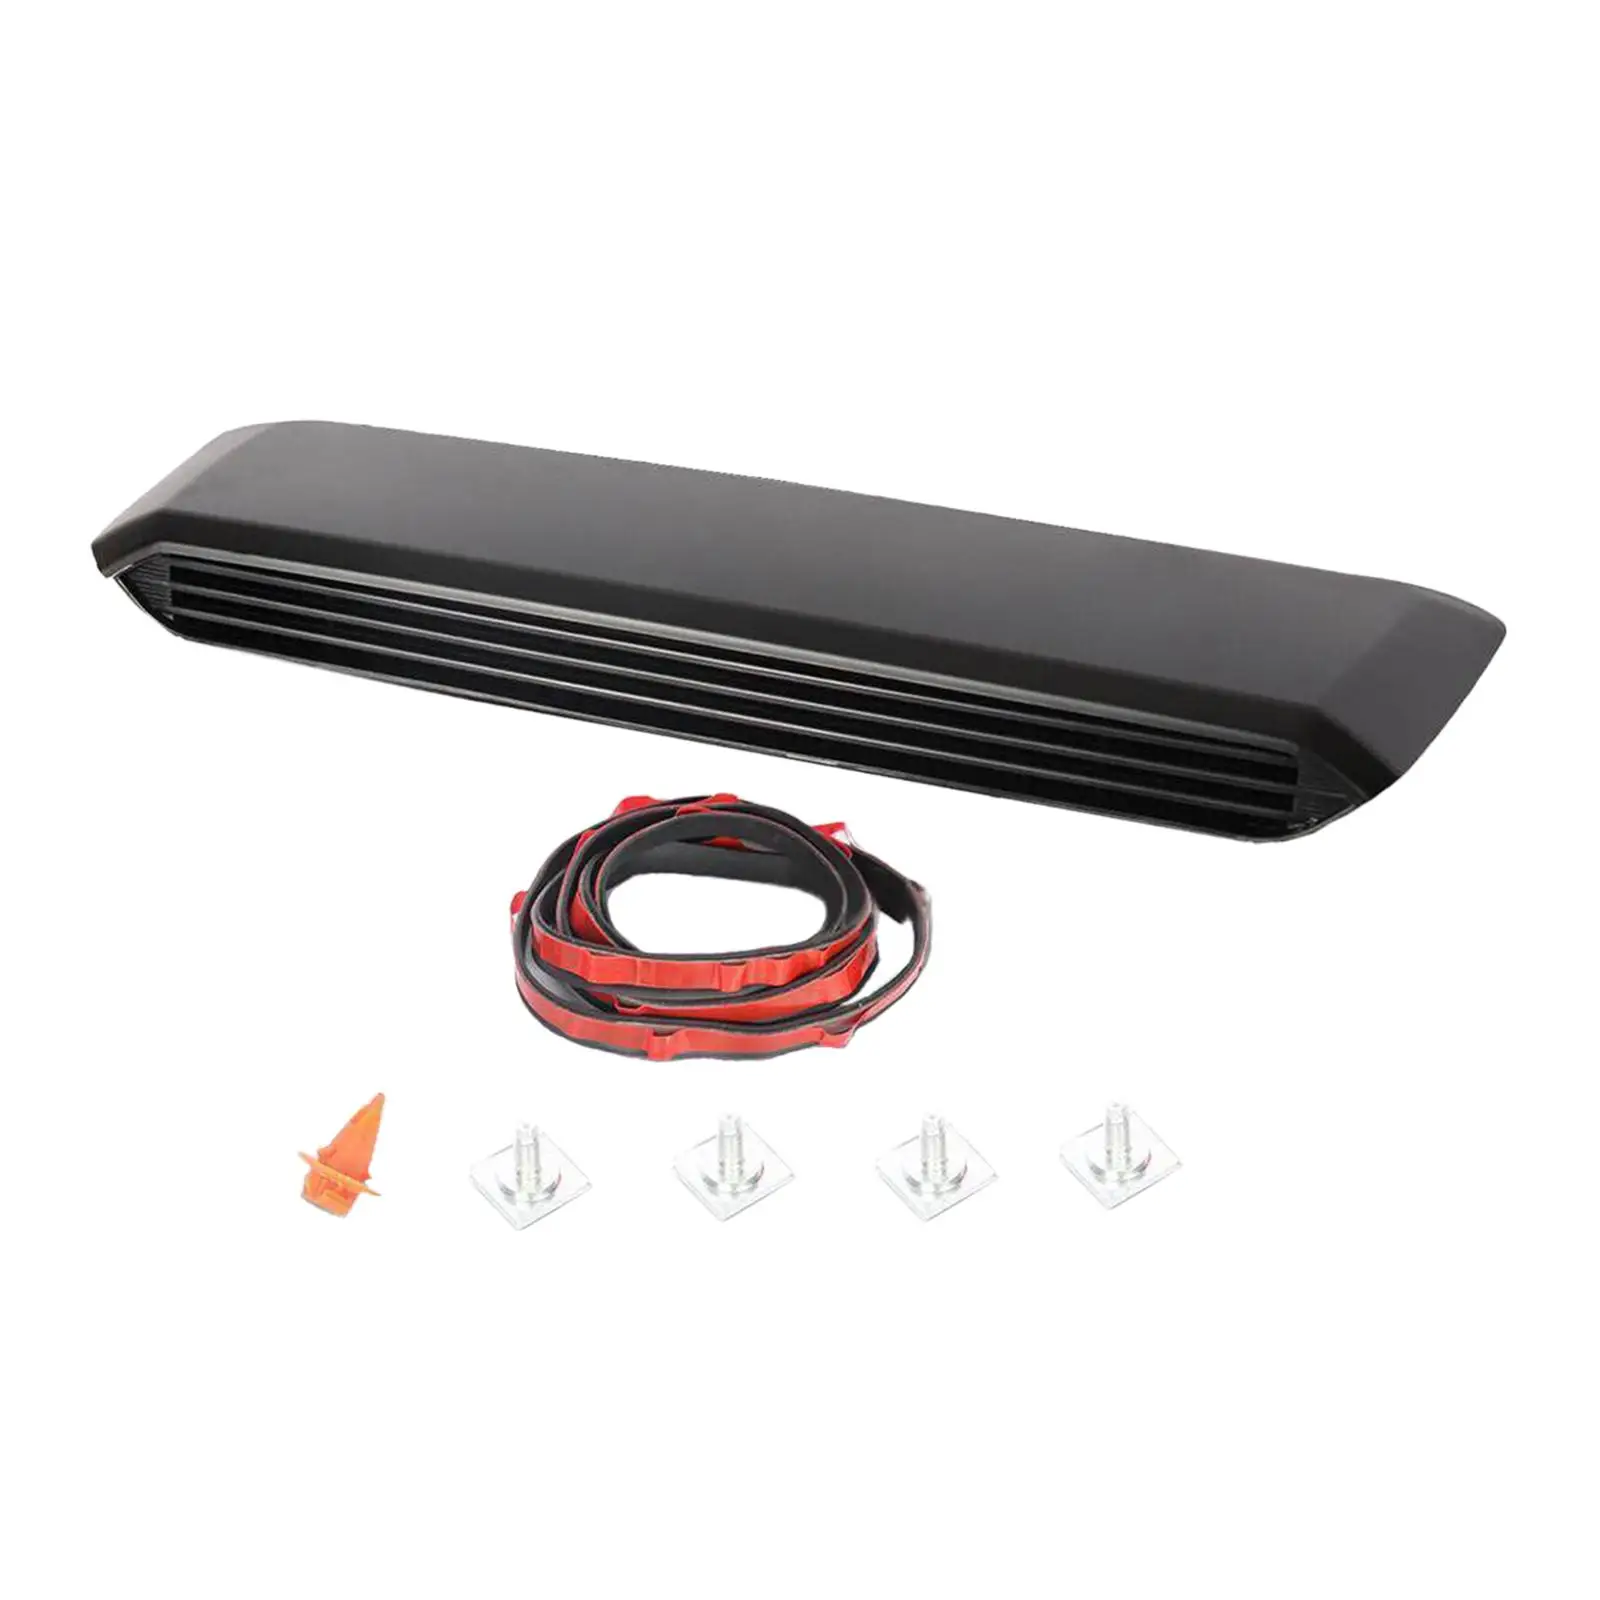 76181-04900/ Hood Scoop Kit/ High Performance/ Durable/ Spare Parts /Easy to